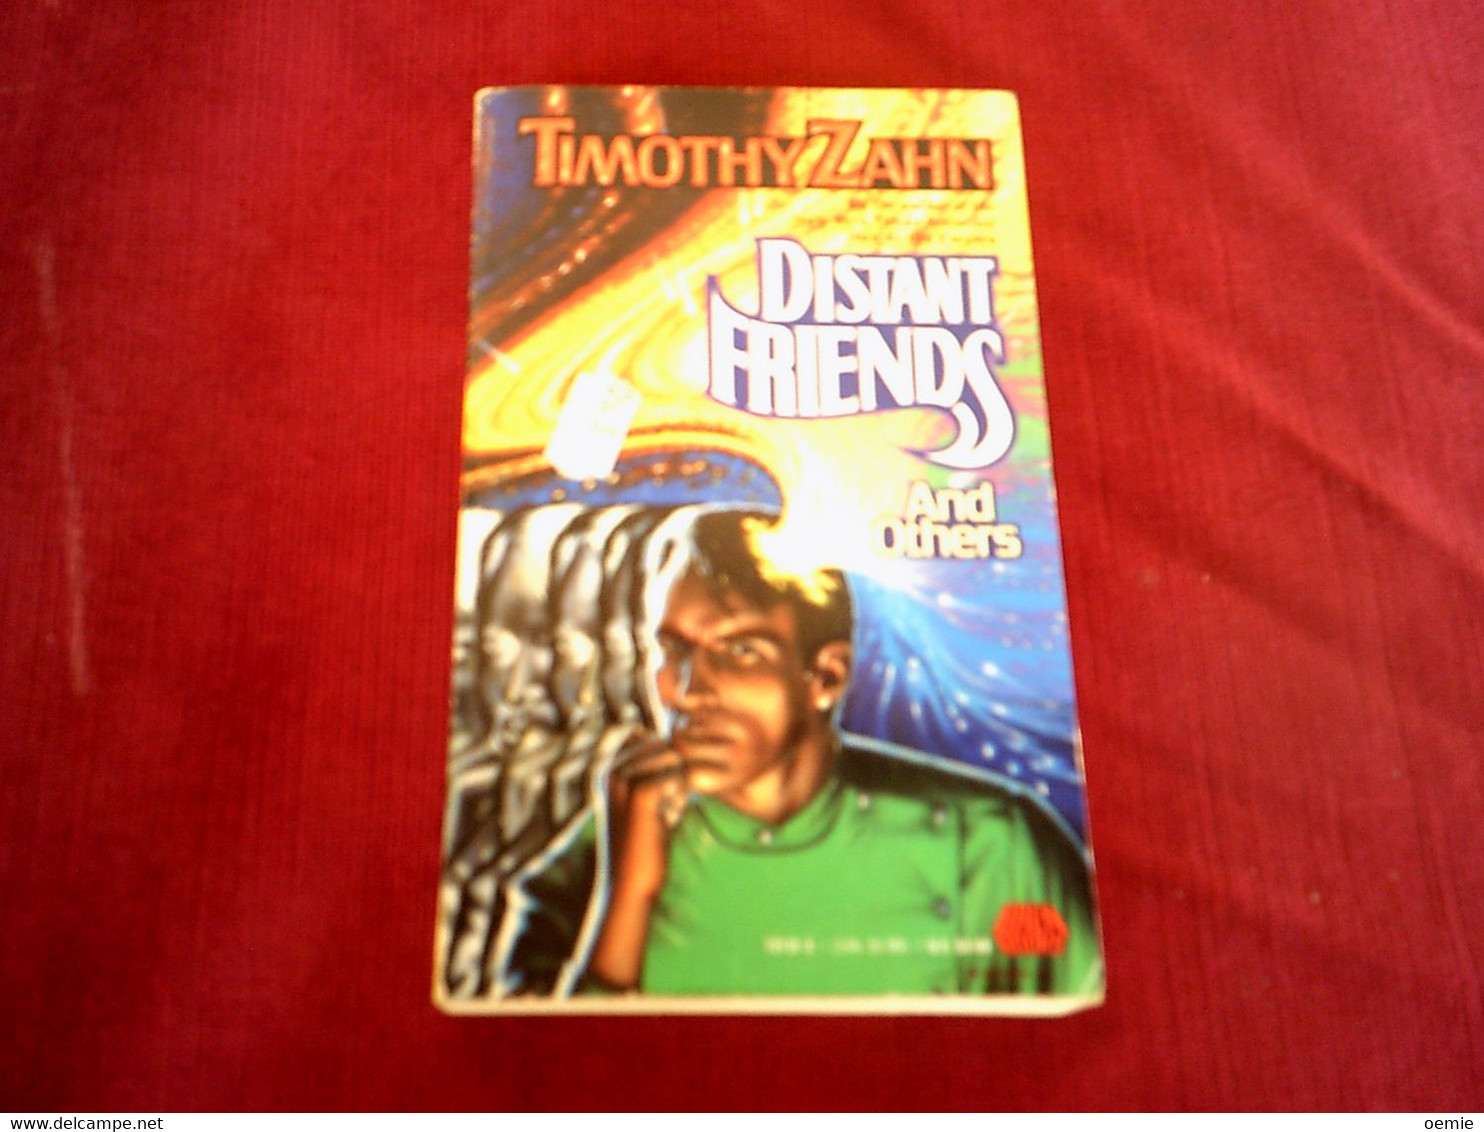 TIMOTHY ZAHN  DISTANT FRIENDS - Sciencefiction